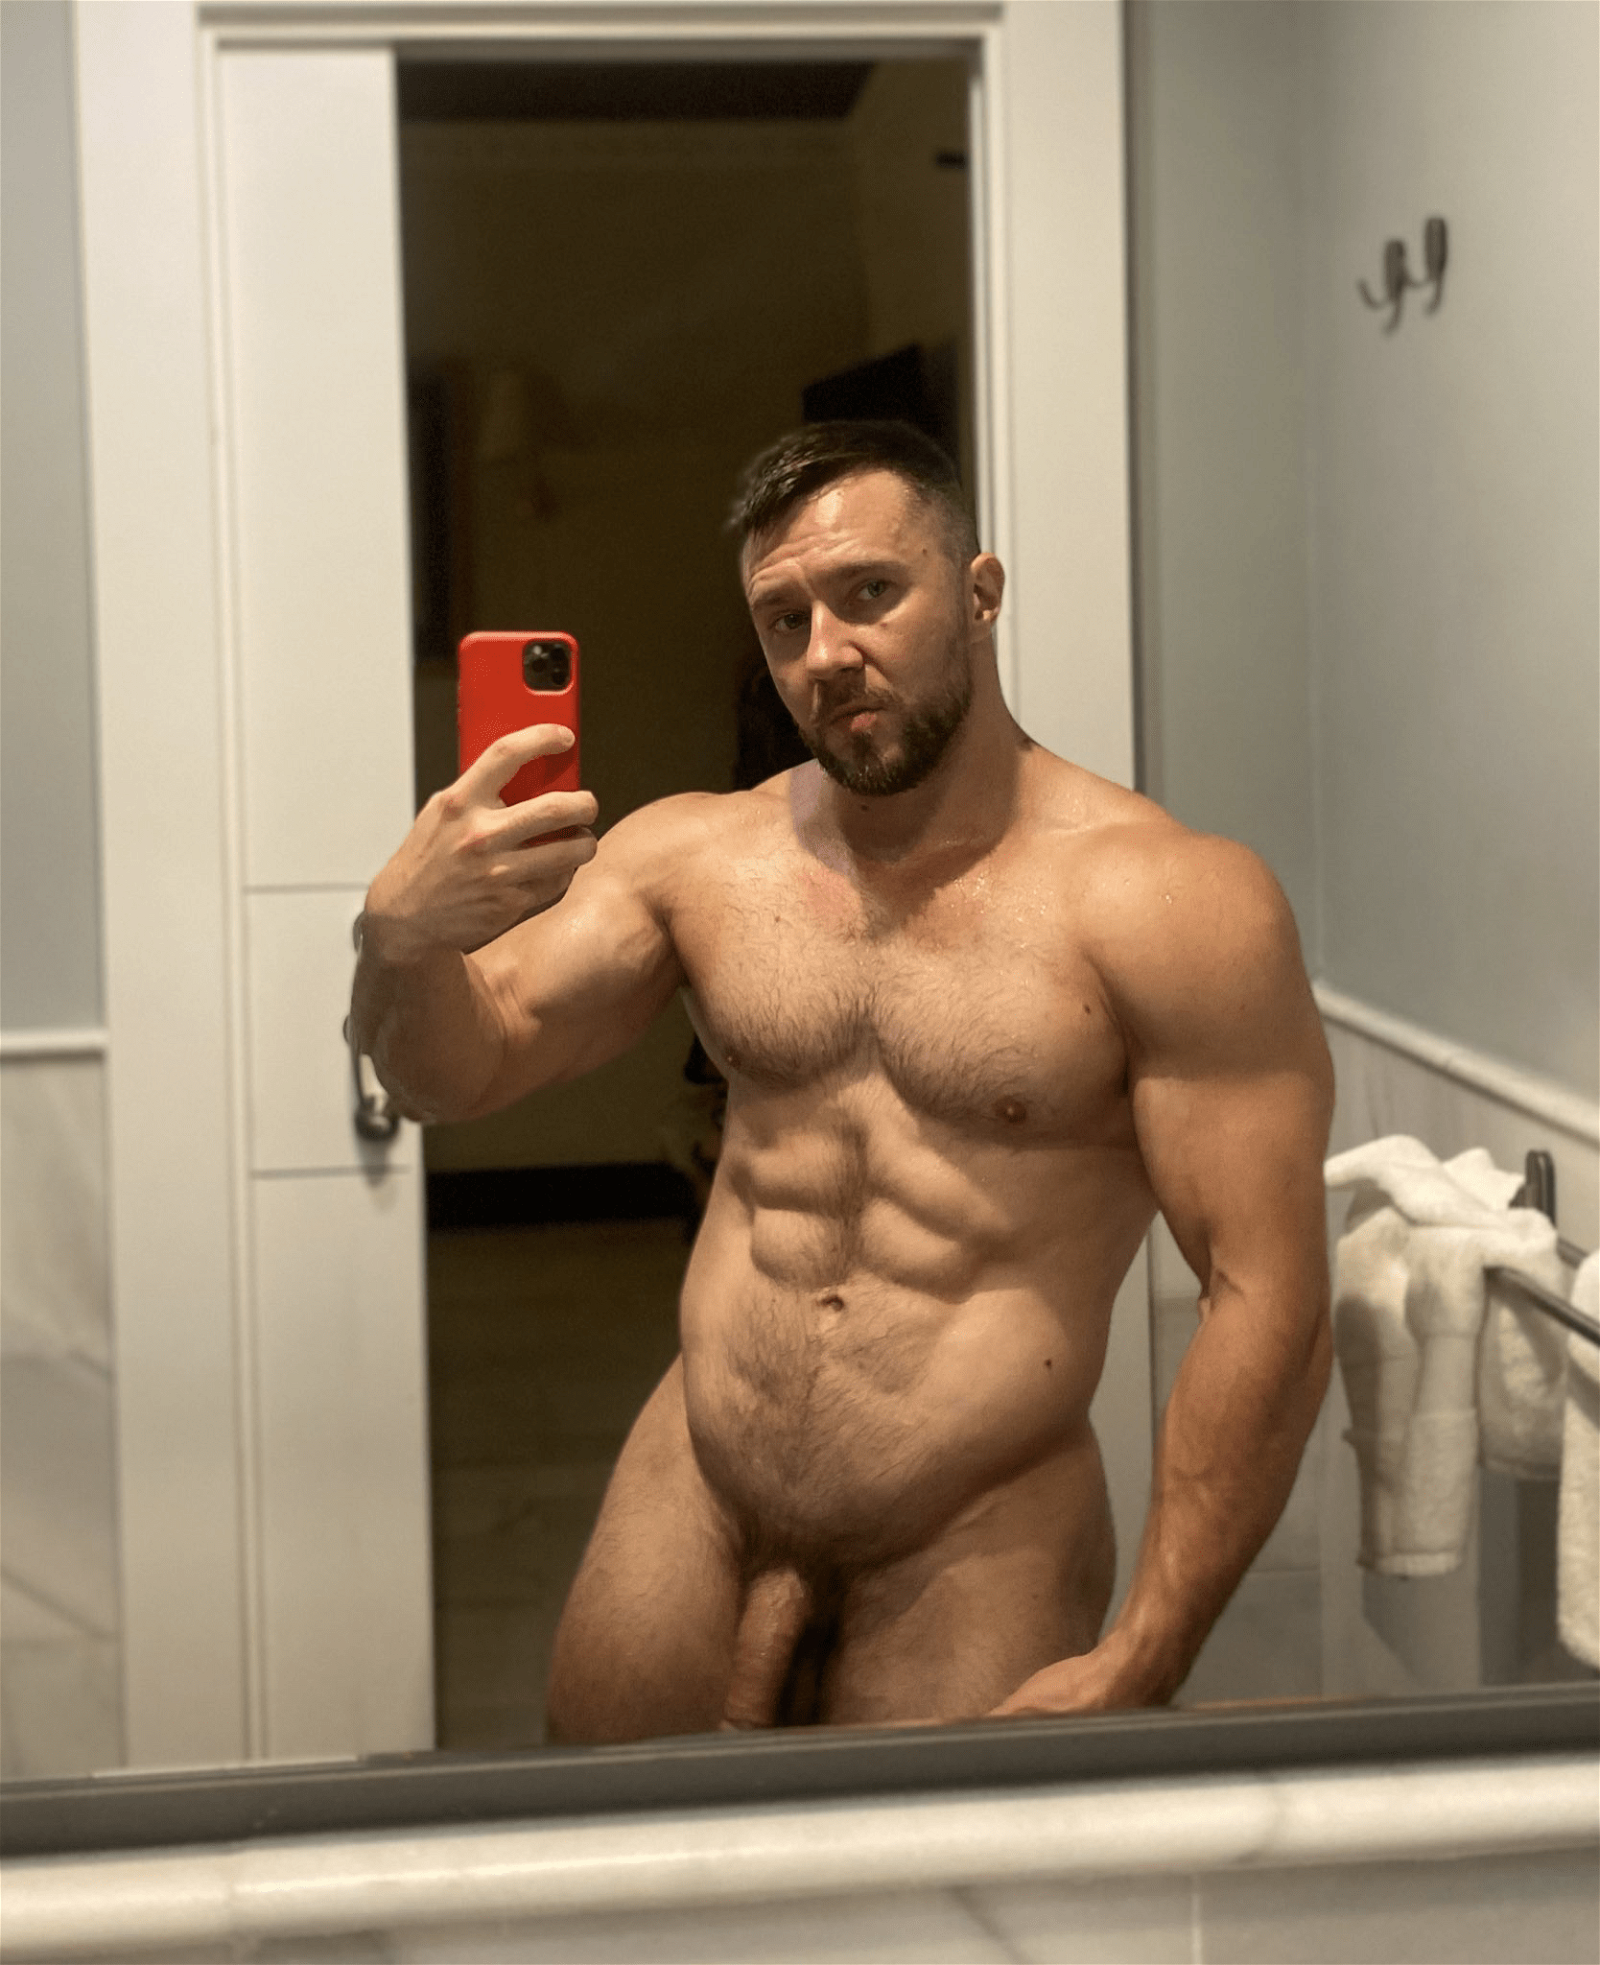 Watch the Photo by Ultra-Masculine-XXX with the username @Ultra-Masculine-XXX, posted on November 28, 2023. The post is about the topic Bodybuilders. and the text says 'Stanislav Chugunov #StanislavChugunov #hairy #muscle #hunk #beard'